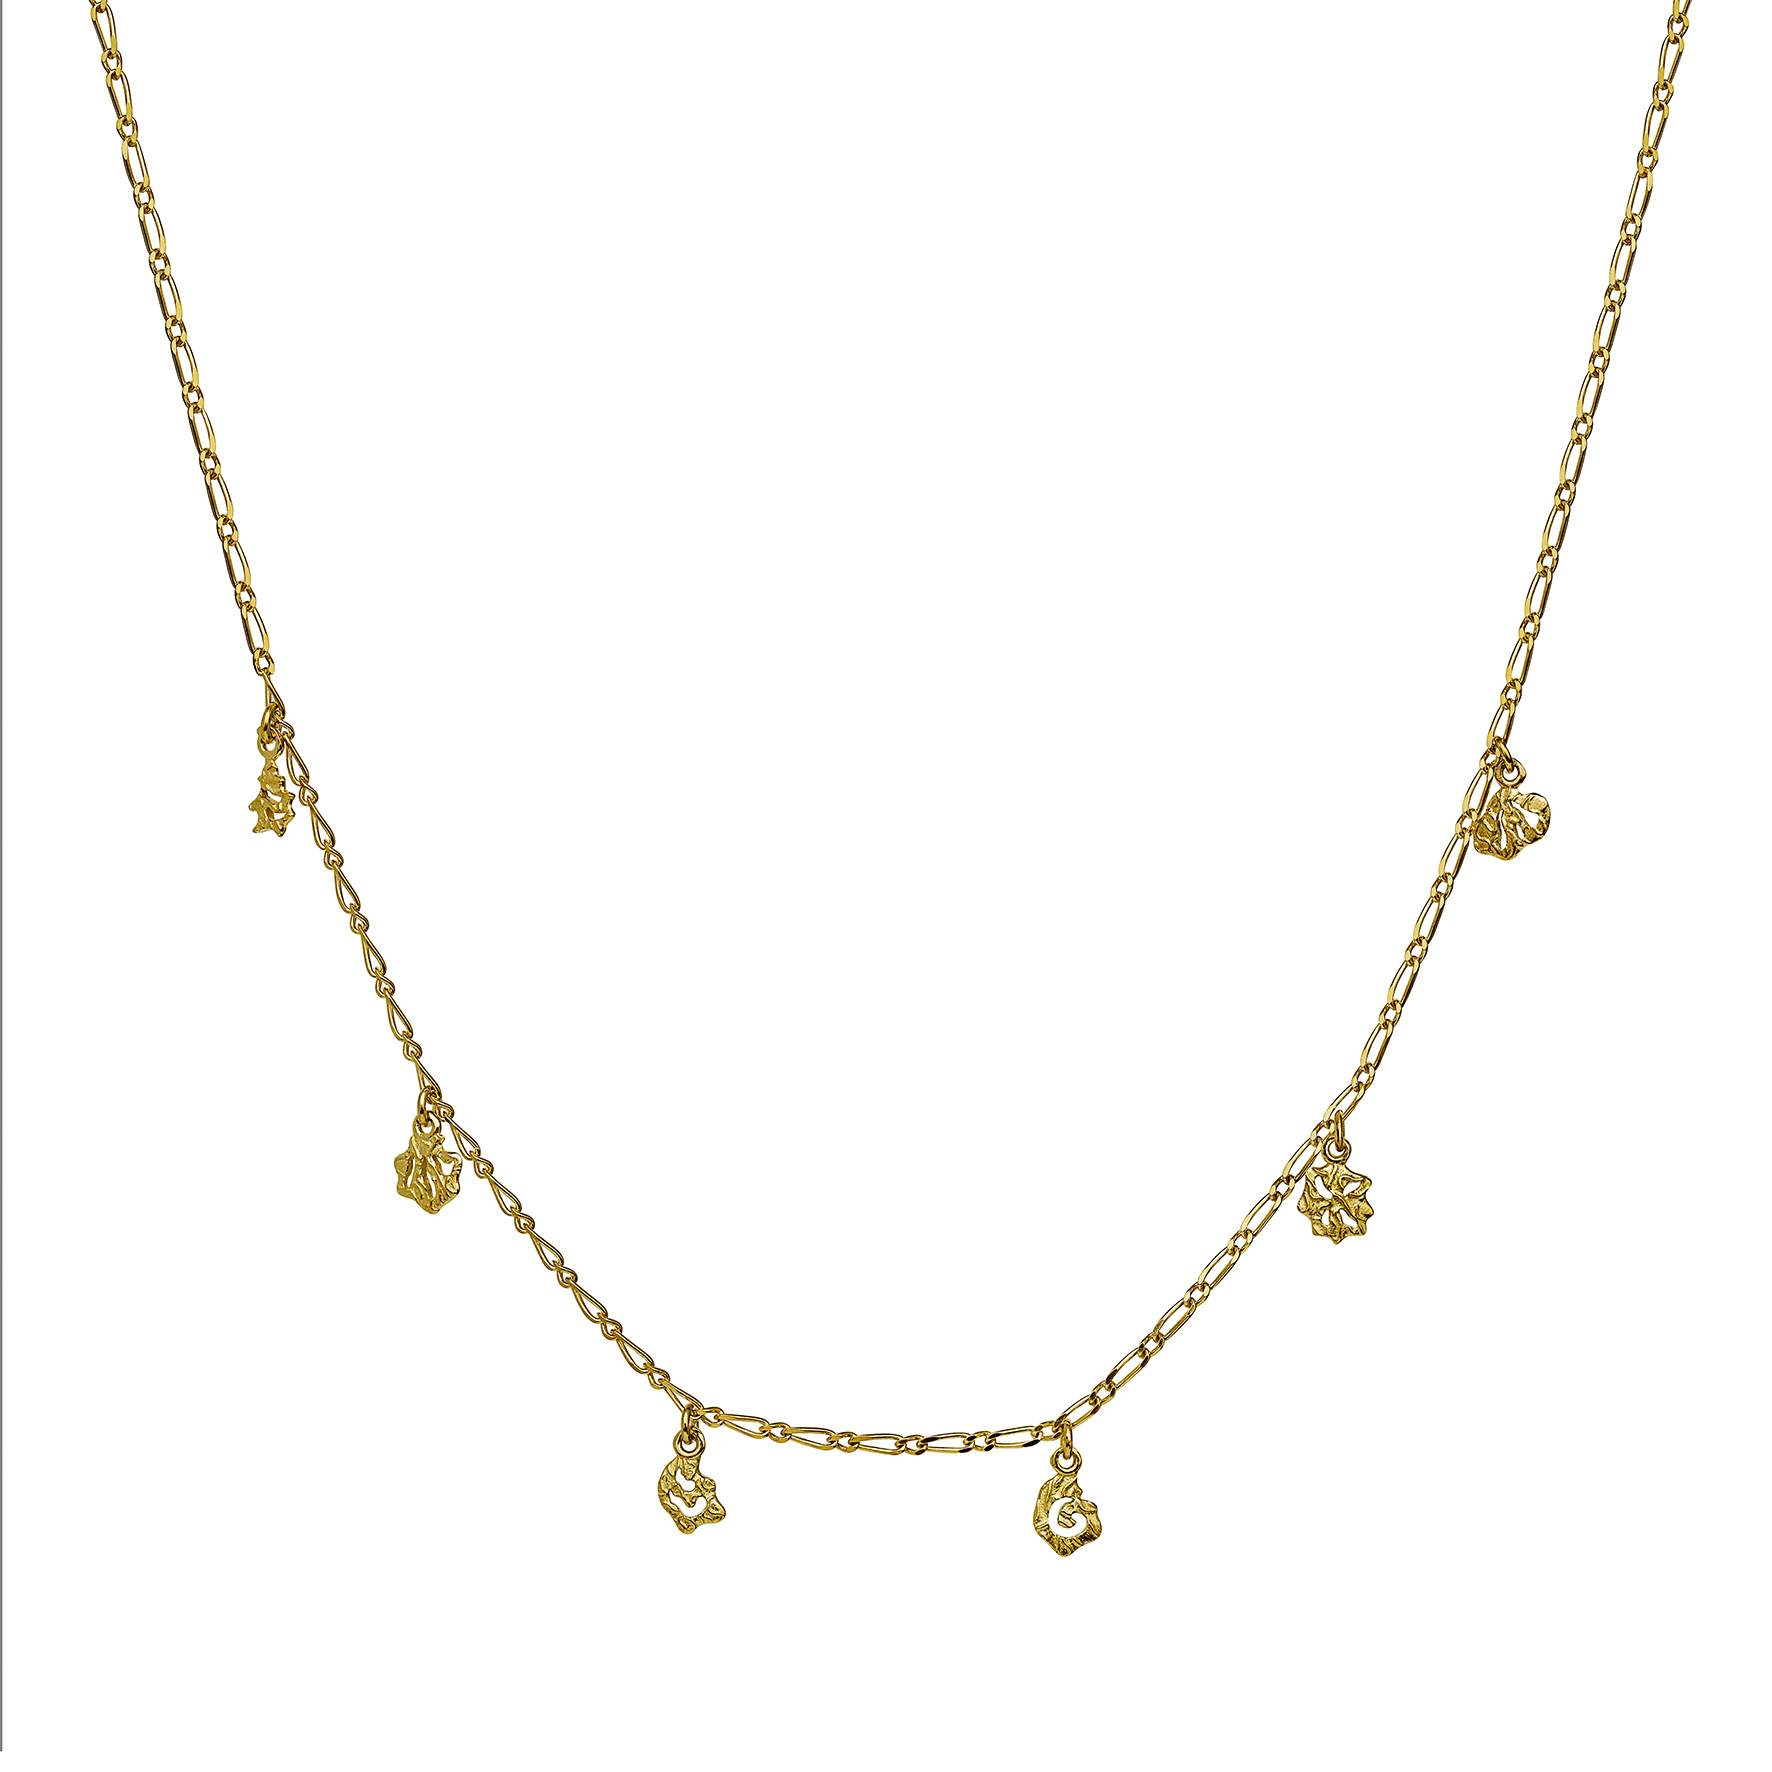 Adina Necklace from Maanesten in Goldplated-Silver Sterling 925